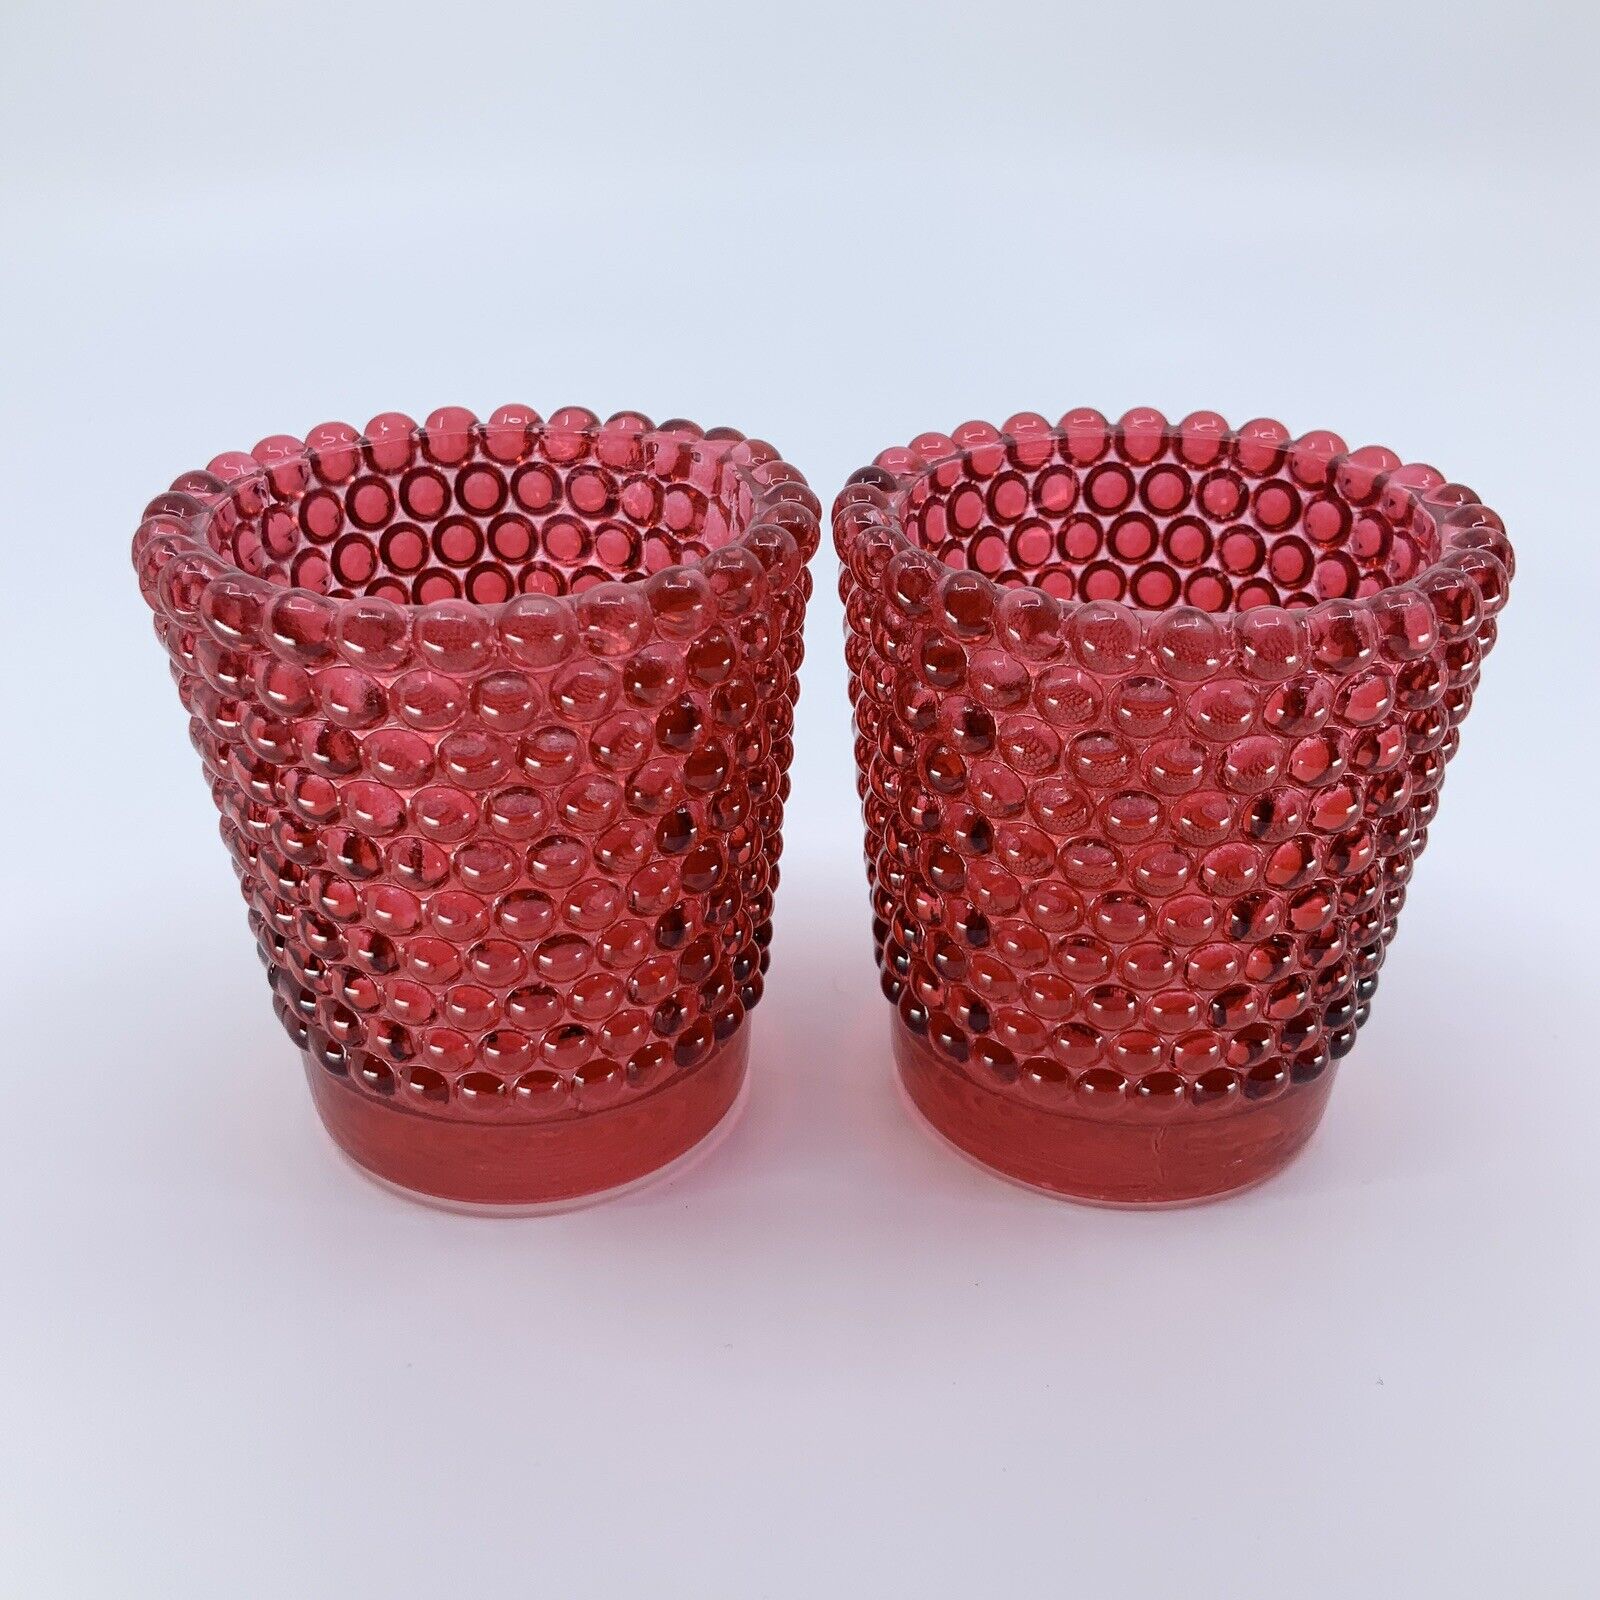 VTG Pair of Ruby Red Flashed Glass Hobnail Votive Candle Toothpick Holders 2.5”